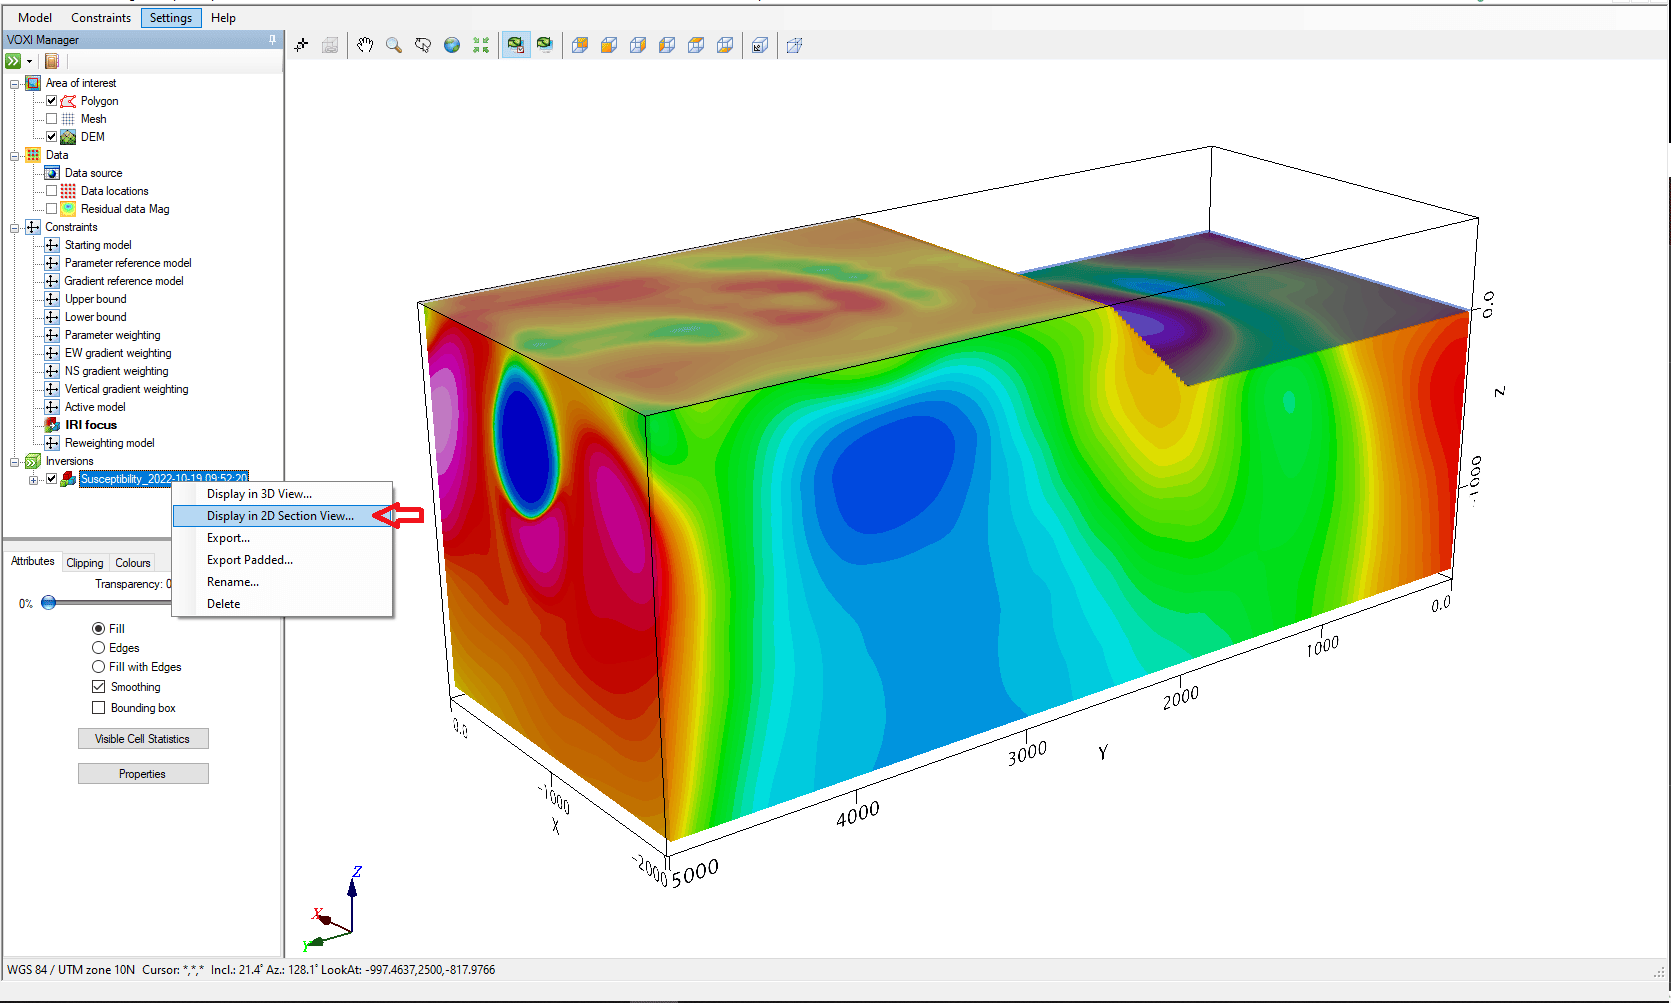 Unlock the full potential of your geophysical data with the 2D Section Viewer in Oasis montaj 2022.2